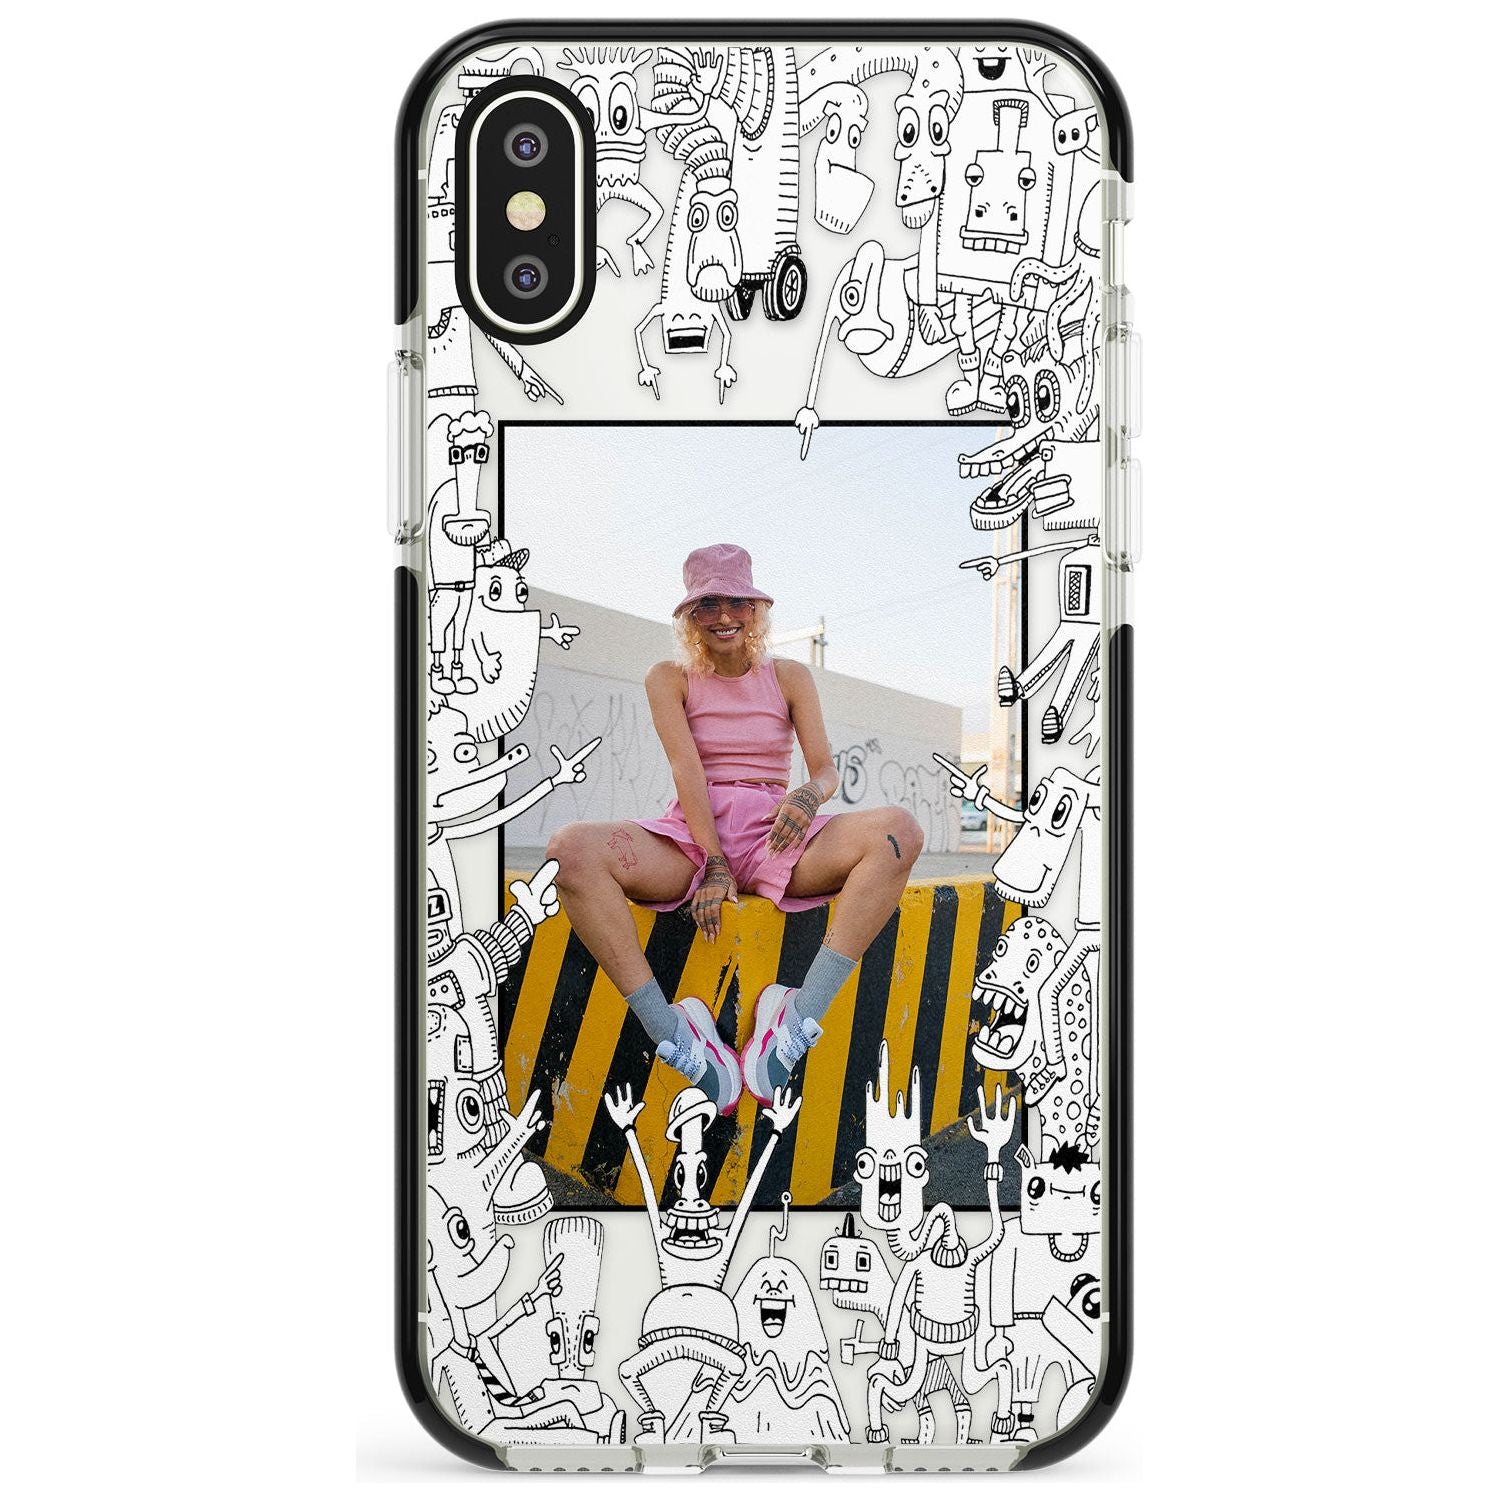 Personalised Look At This Photo Case Black Impact Phone Case for iPhone X XS Max XR